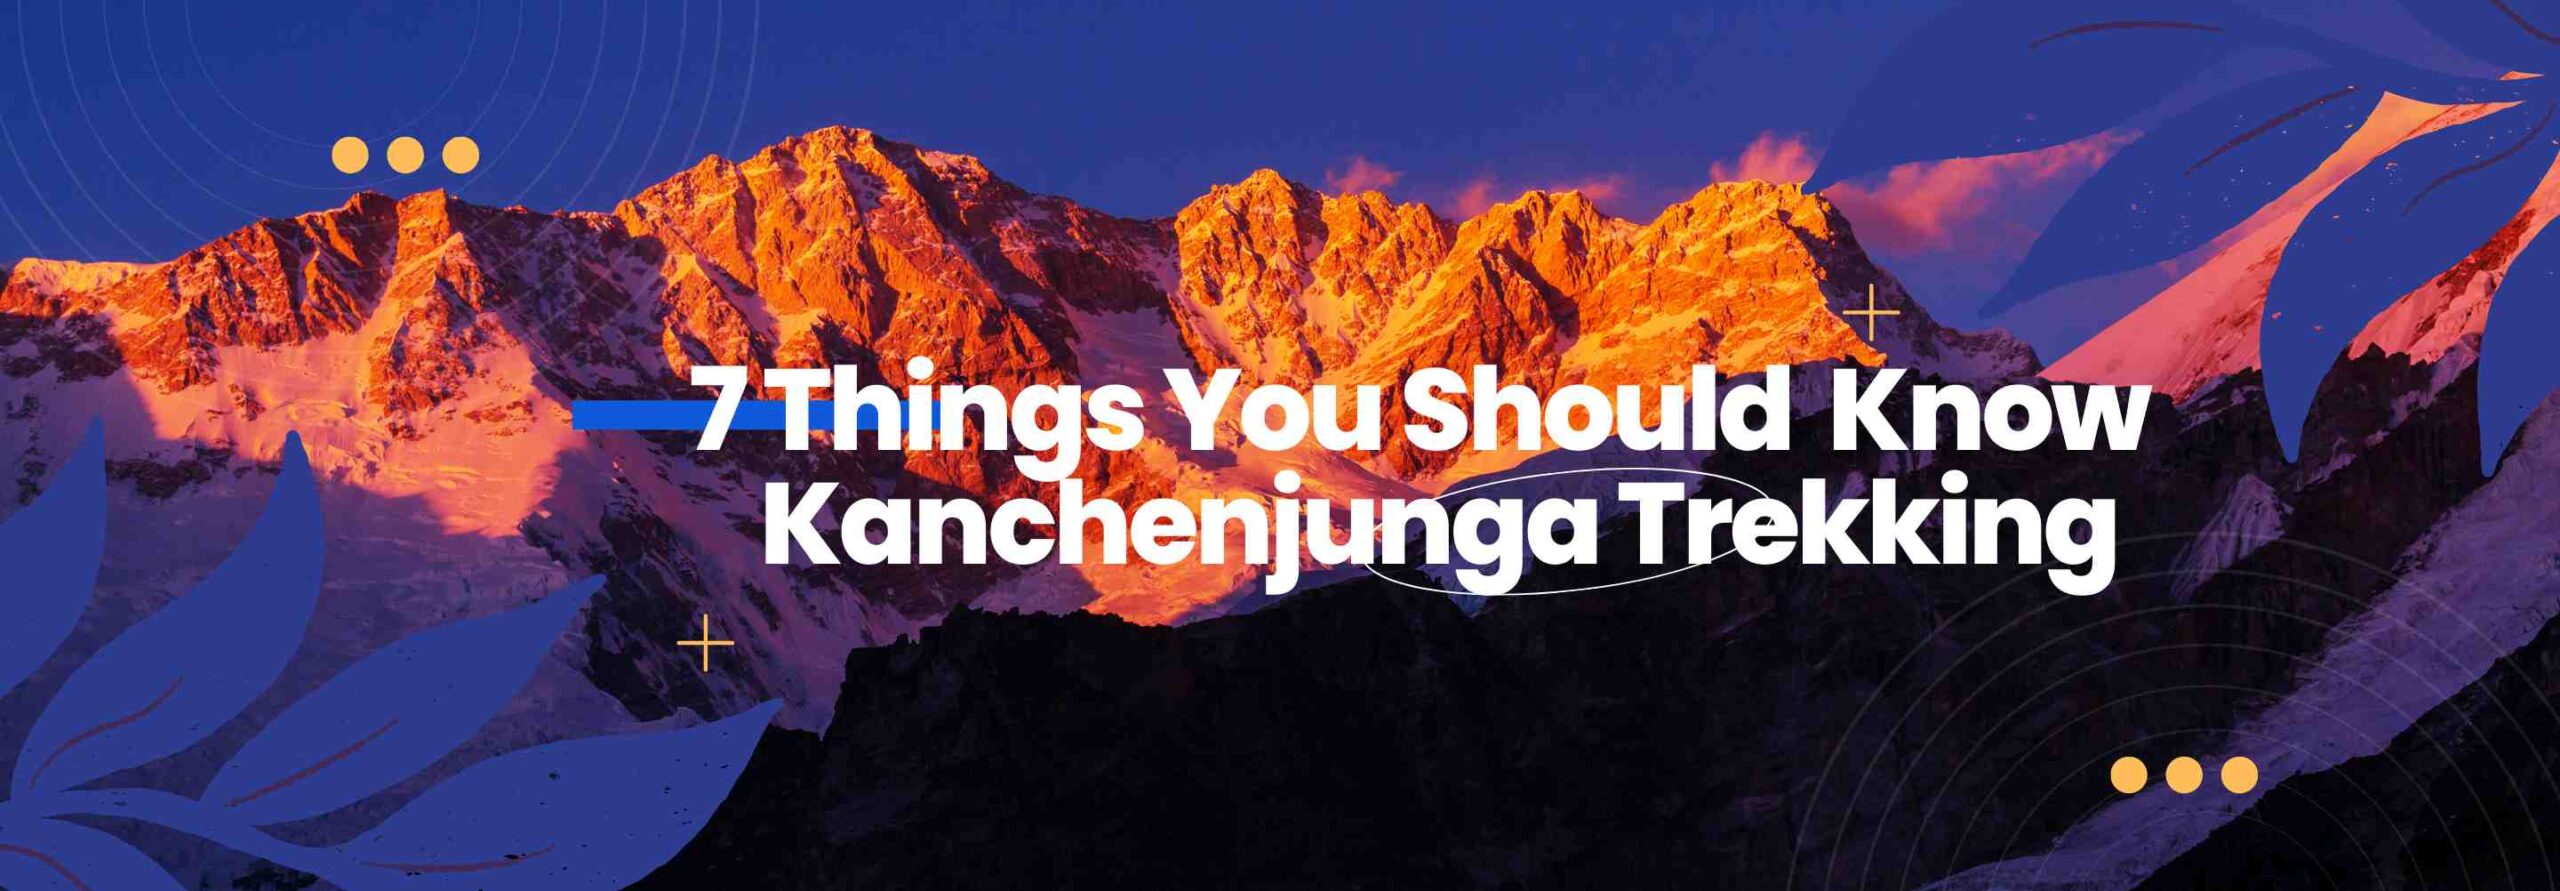 7 Things You Should Know About Kanchenjunga Trekking